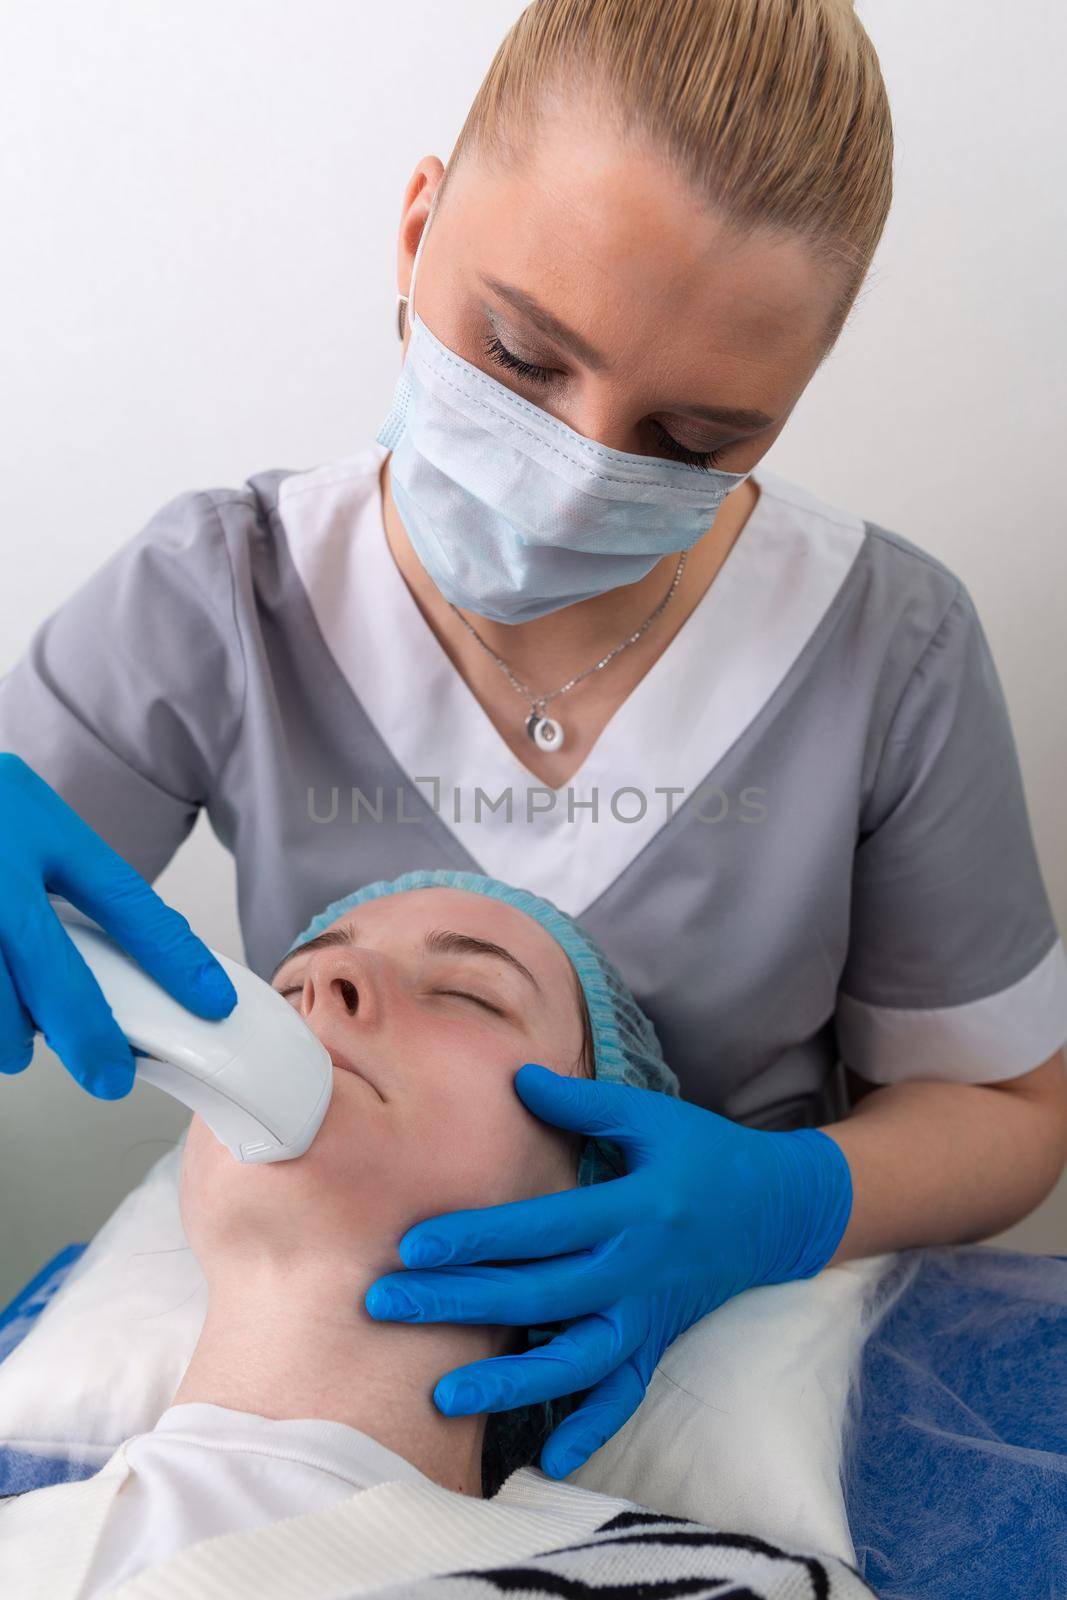 Young woman receiving electric galvanic anti-aging face spa massage at beauty salon. Galvanic massage helps to speed up metabolism, improve regeneration and restore skin protection from harmful external factors.